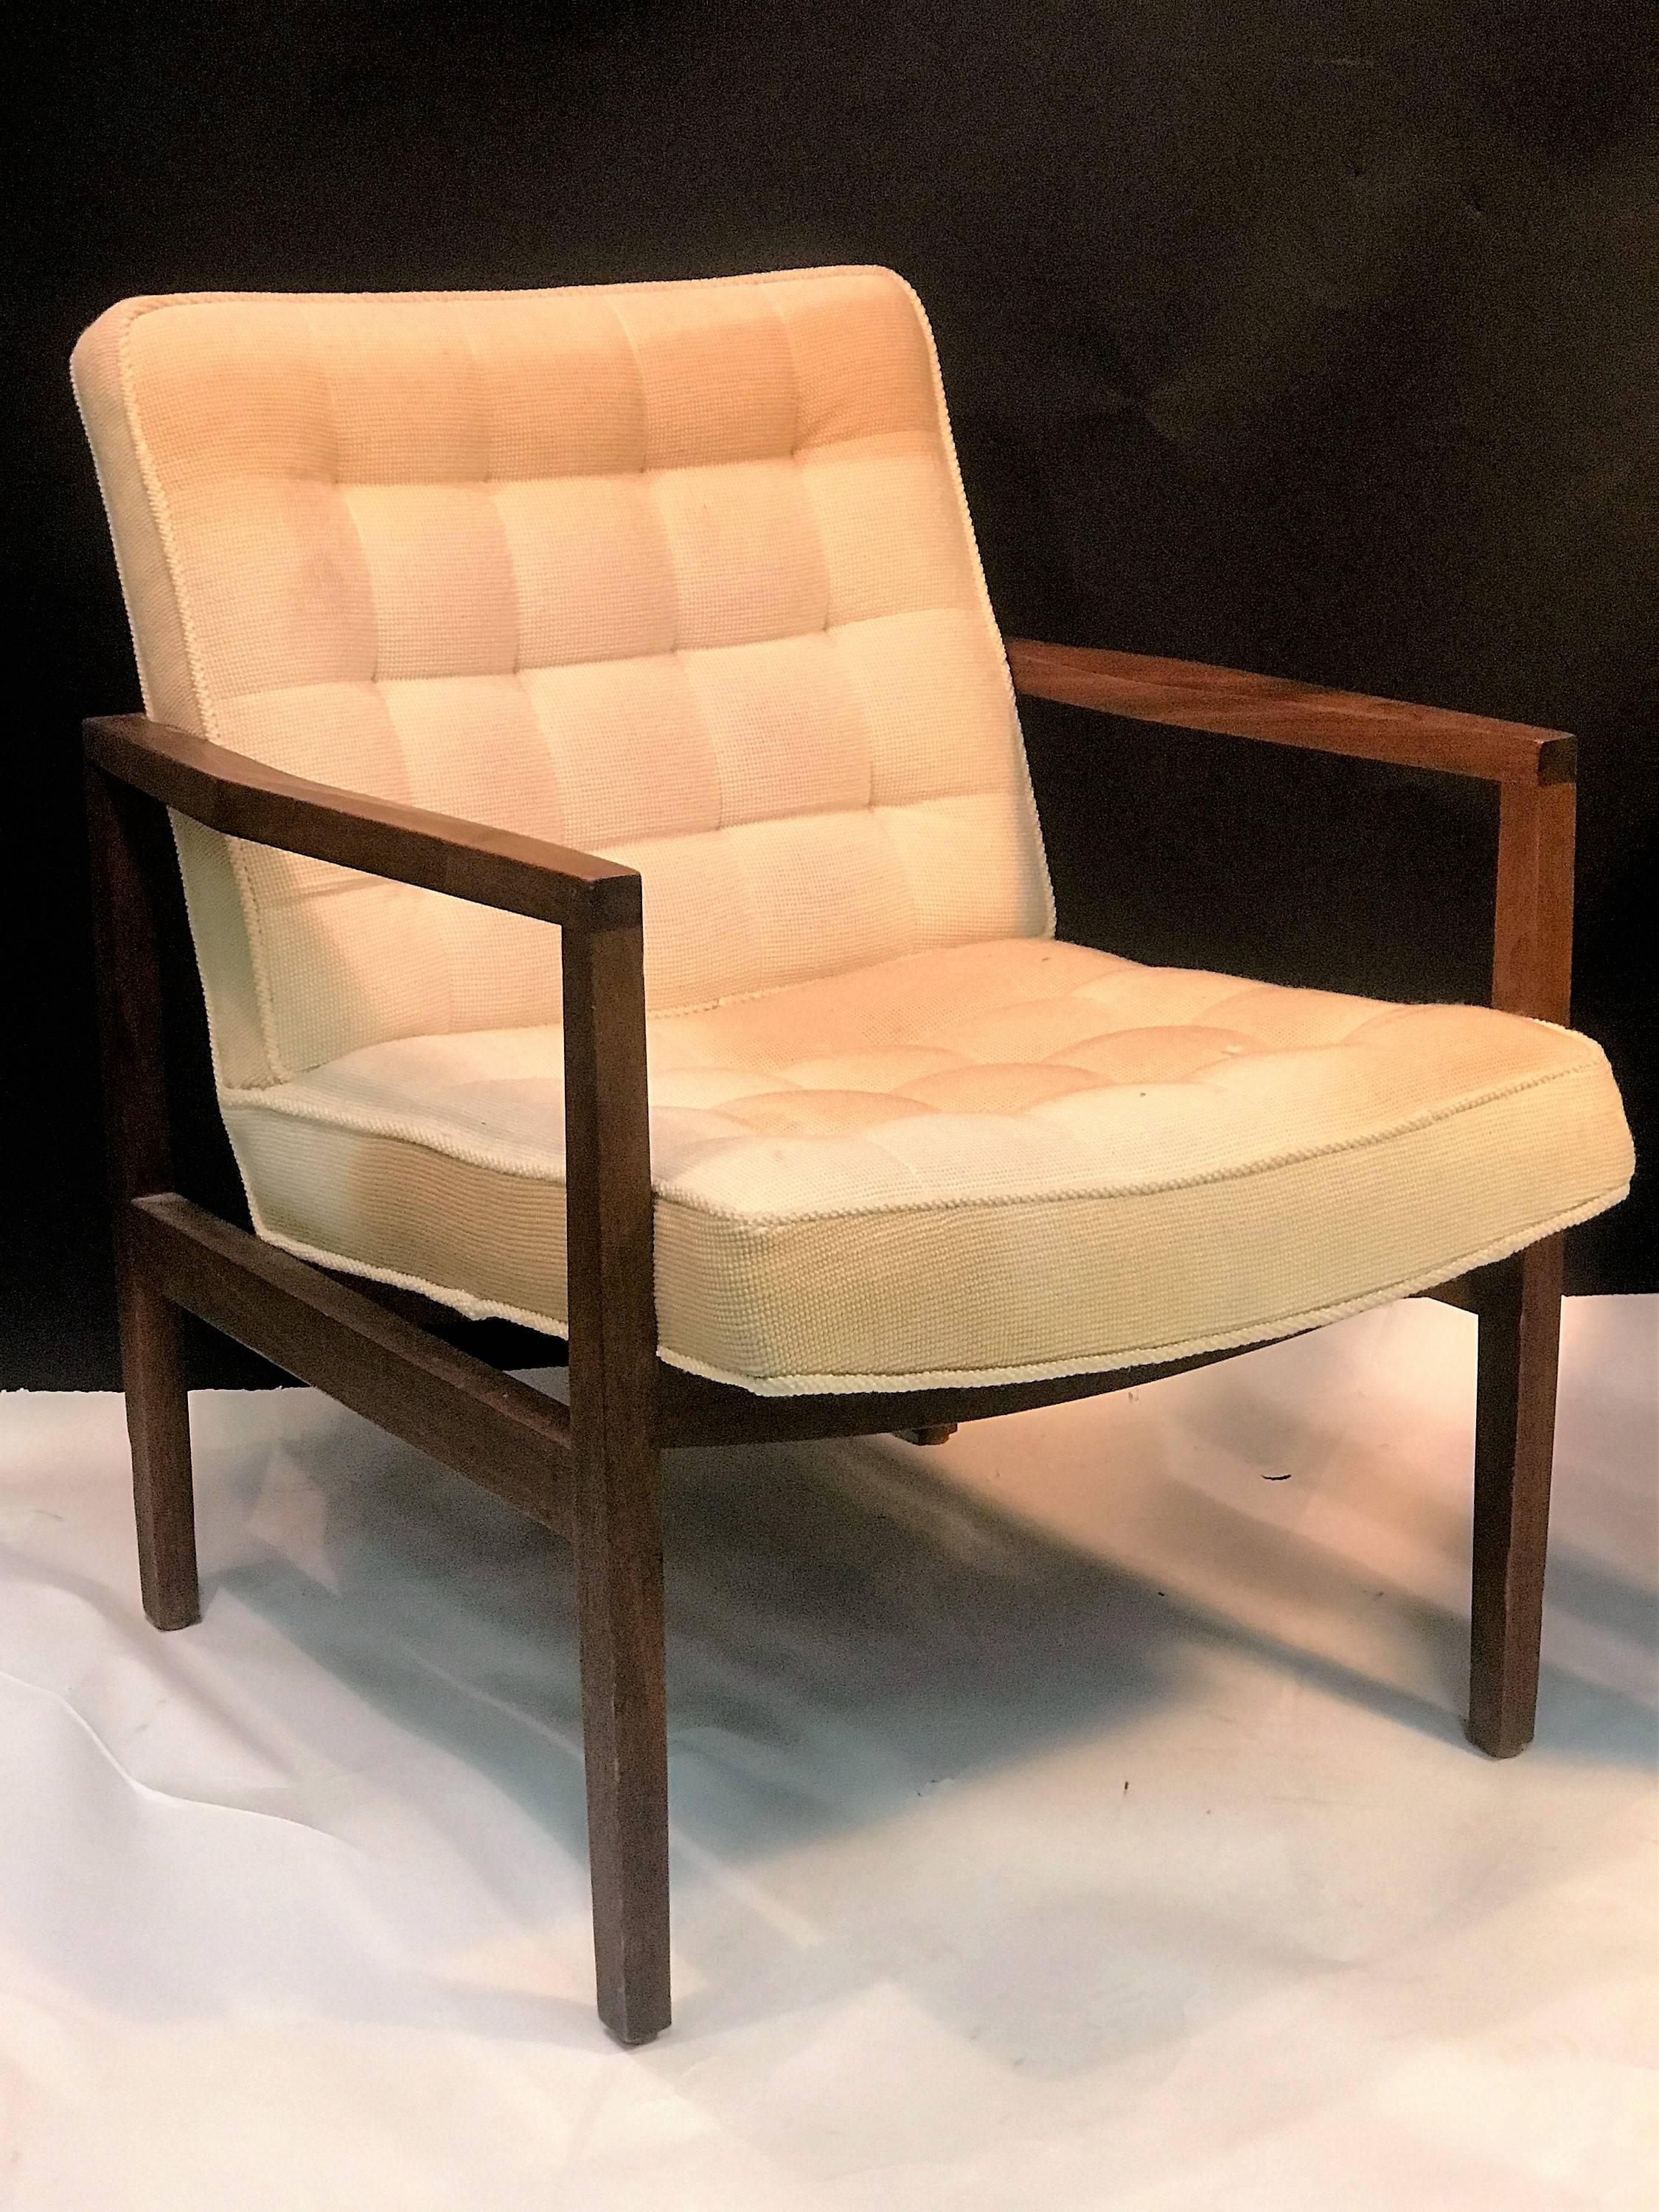 American Sharp Pair of Mid-Century Modern Armchairs Attributed to Edward Wormley For Sale